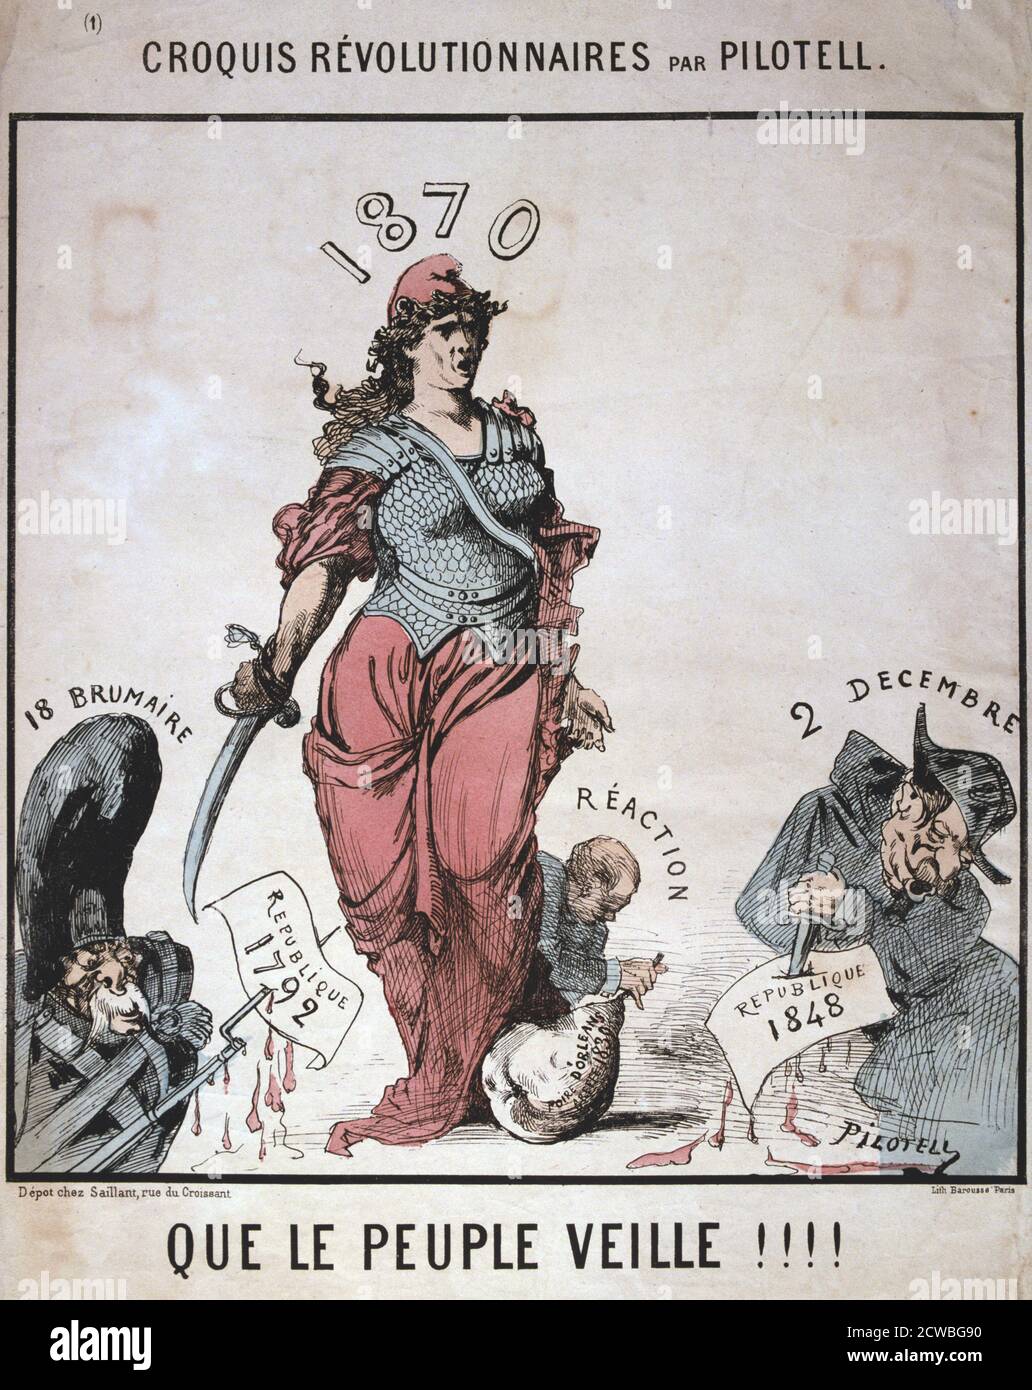 Que le Peuple Veille' by Pilotell, allegory of the French Republic, Franco-Prussian War, 1870. The Third Republic was proclaimed in September 1870 after the defeat of the French at the Battle of Sedan and the capture of Napoleon III brought the Second Empire to an end. The previous Republics of 1792 and 1848 were short-lived, being respectively ended by Napoleon's coup of the 18 Brumaire (1799) and that of Louis-Napoleon to establish the Second Empire (1852). The Third Republic endured until France's capitulation to the Nazi invaders in 1940. From a private collection. Stock Photo